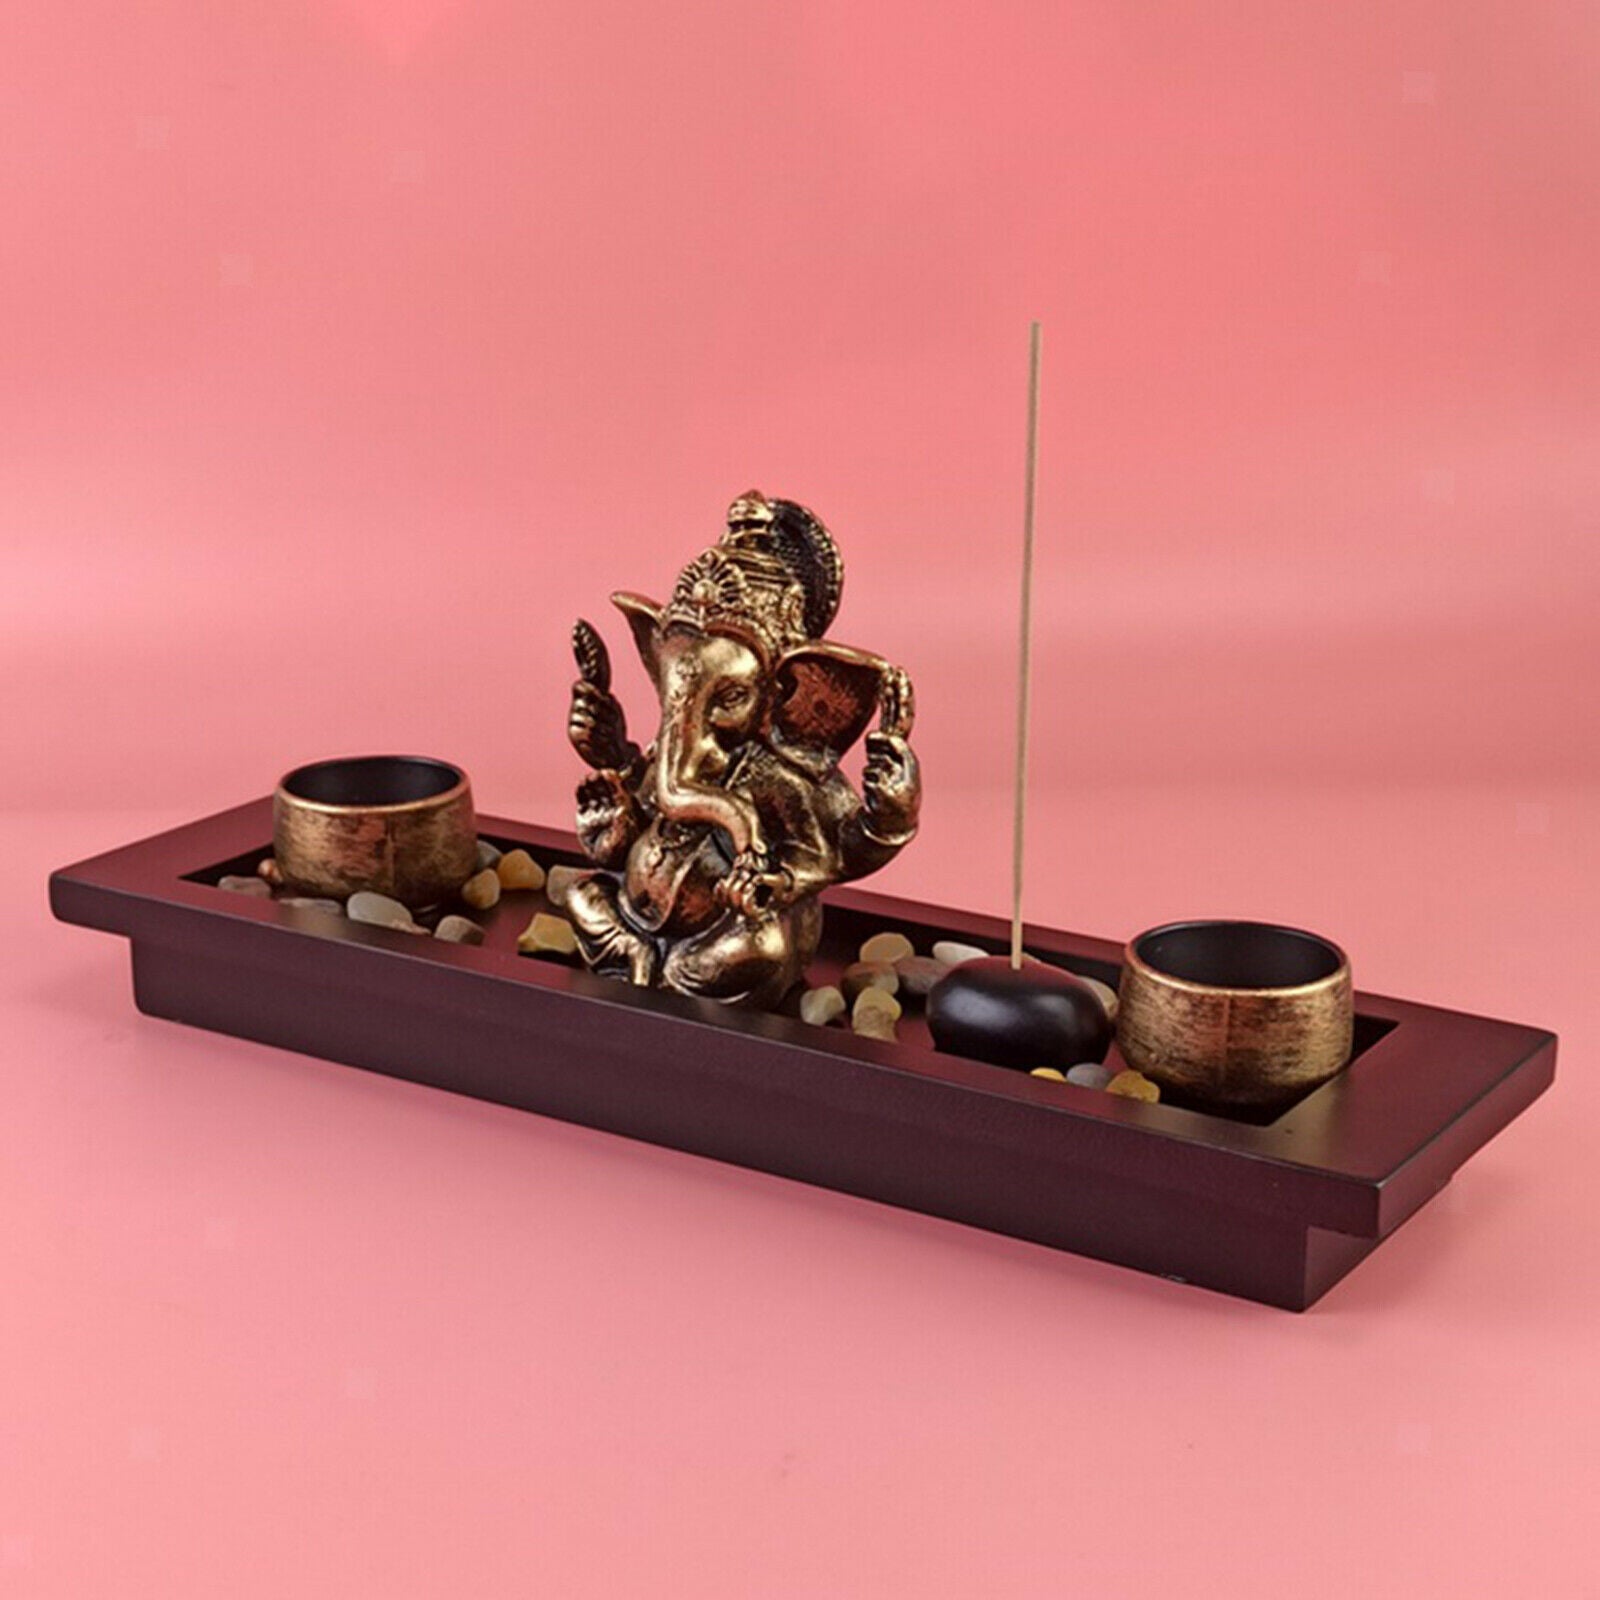 God Lord Ganesha Statue Incense Burner Tray Blessing Home Office Decorations